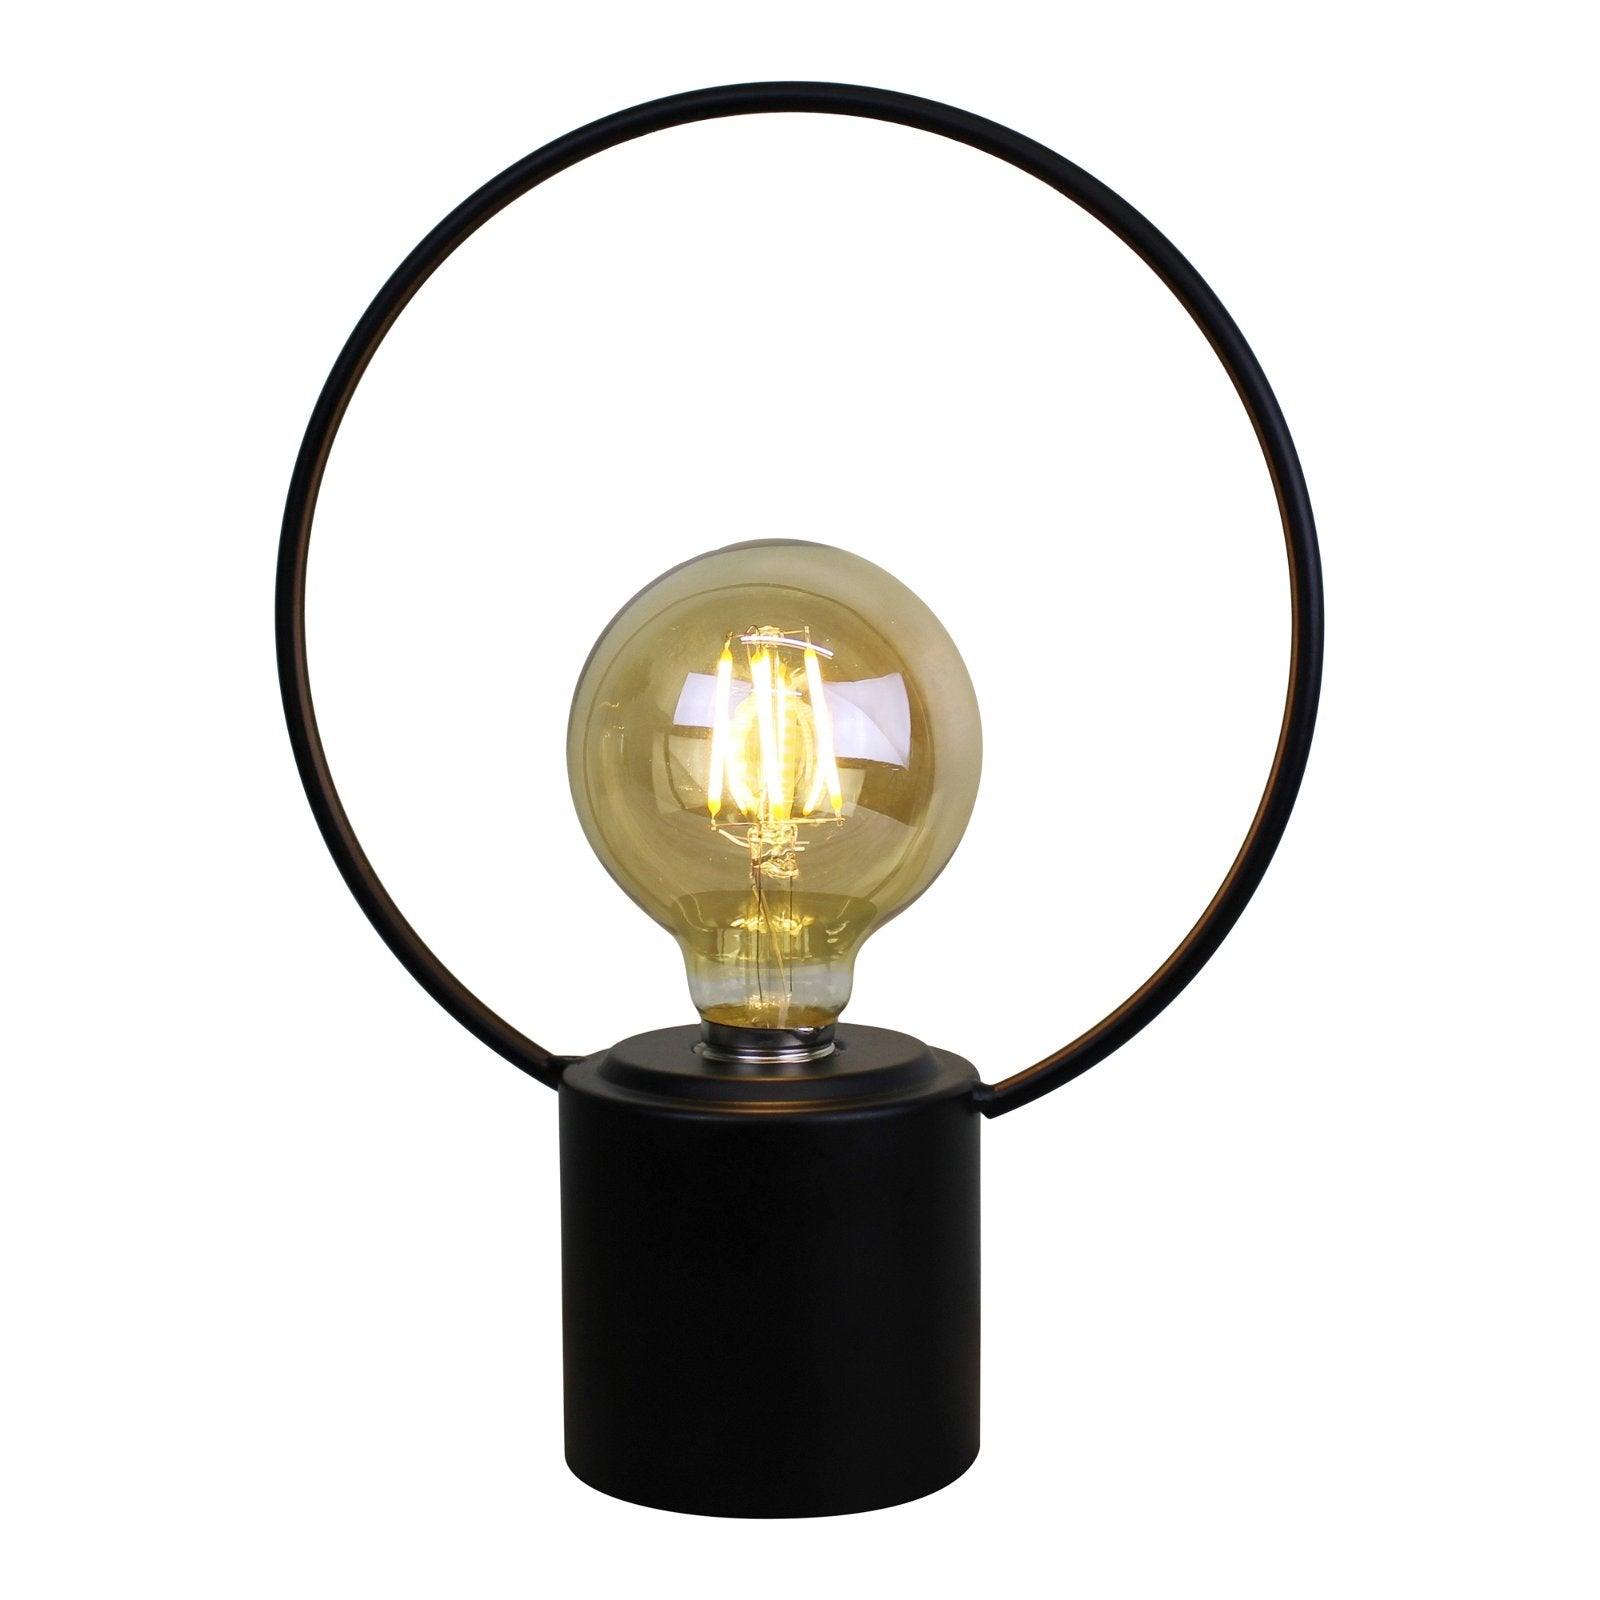 View Free Standing Round Wire Lamp information